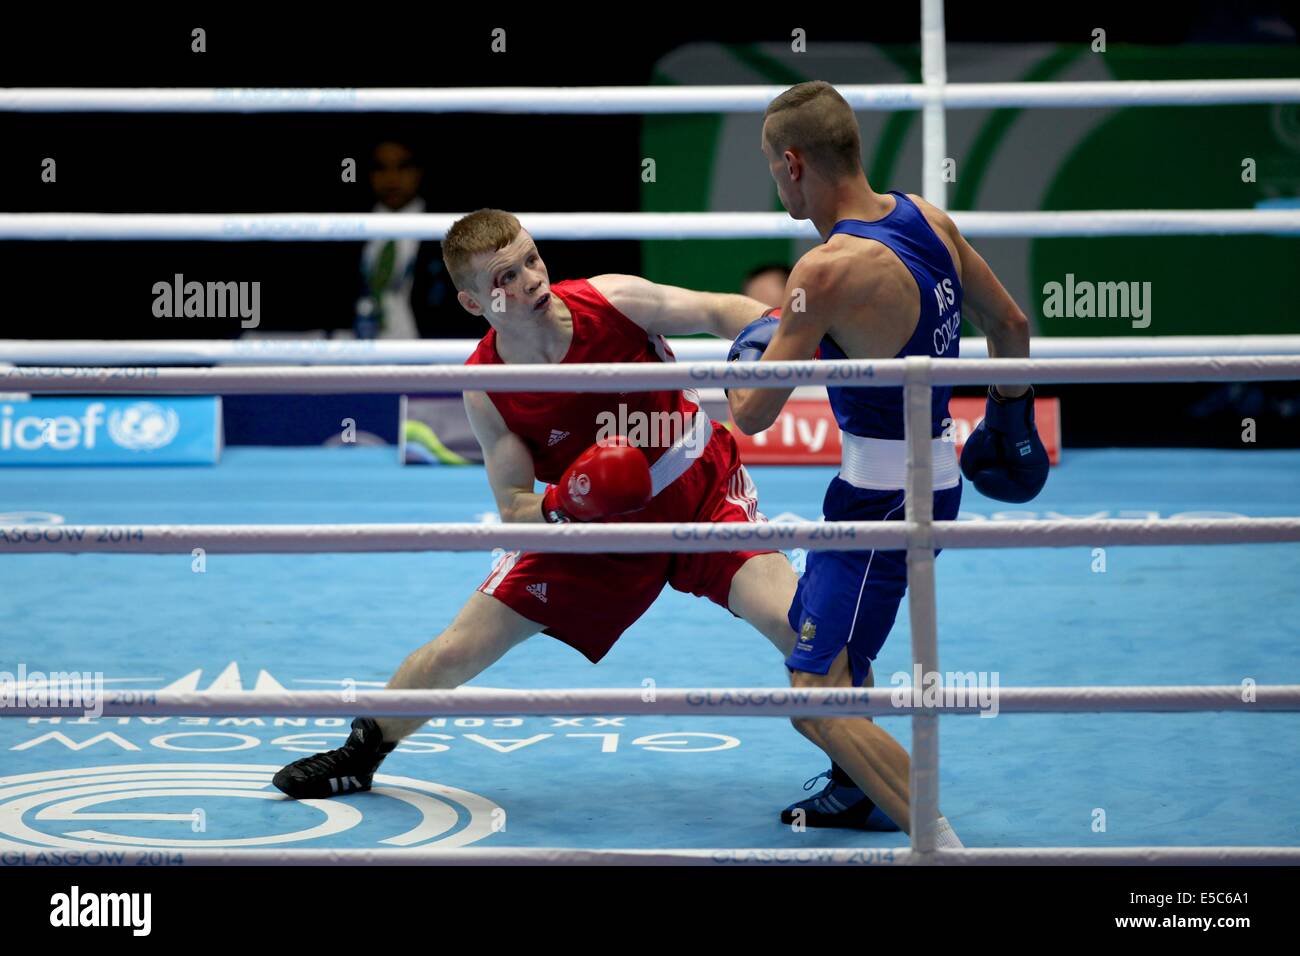 Glasgow, UK. 27th July, 2014. Commonwealth Games day 4. Boxing - Men’s light and light-welter weight bouts.  Charlie Flynn (Scotland, red) beats Nick Cooney (Australia, blue) in their men's lightweight (60kg) preliminary round bout Credit:  Neville Styles/Alamy Live News Stock Photo